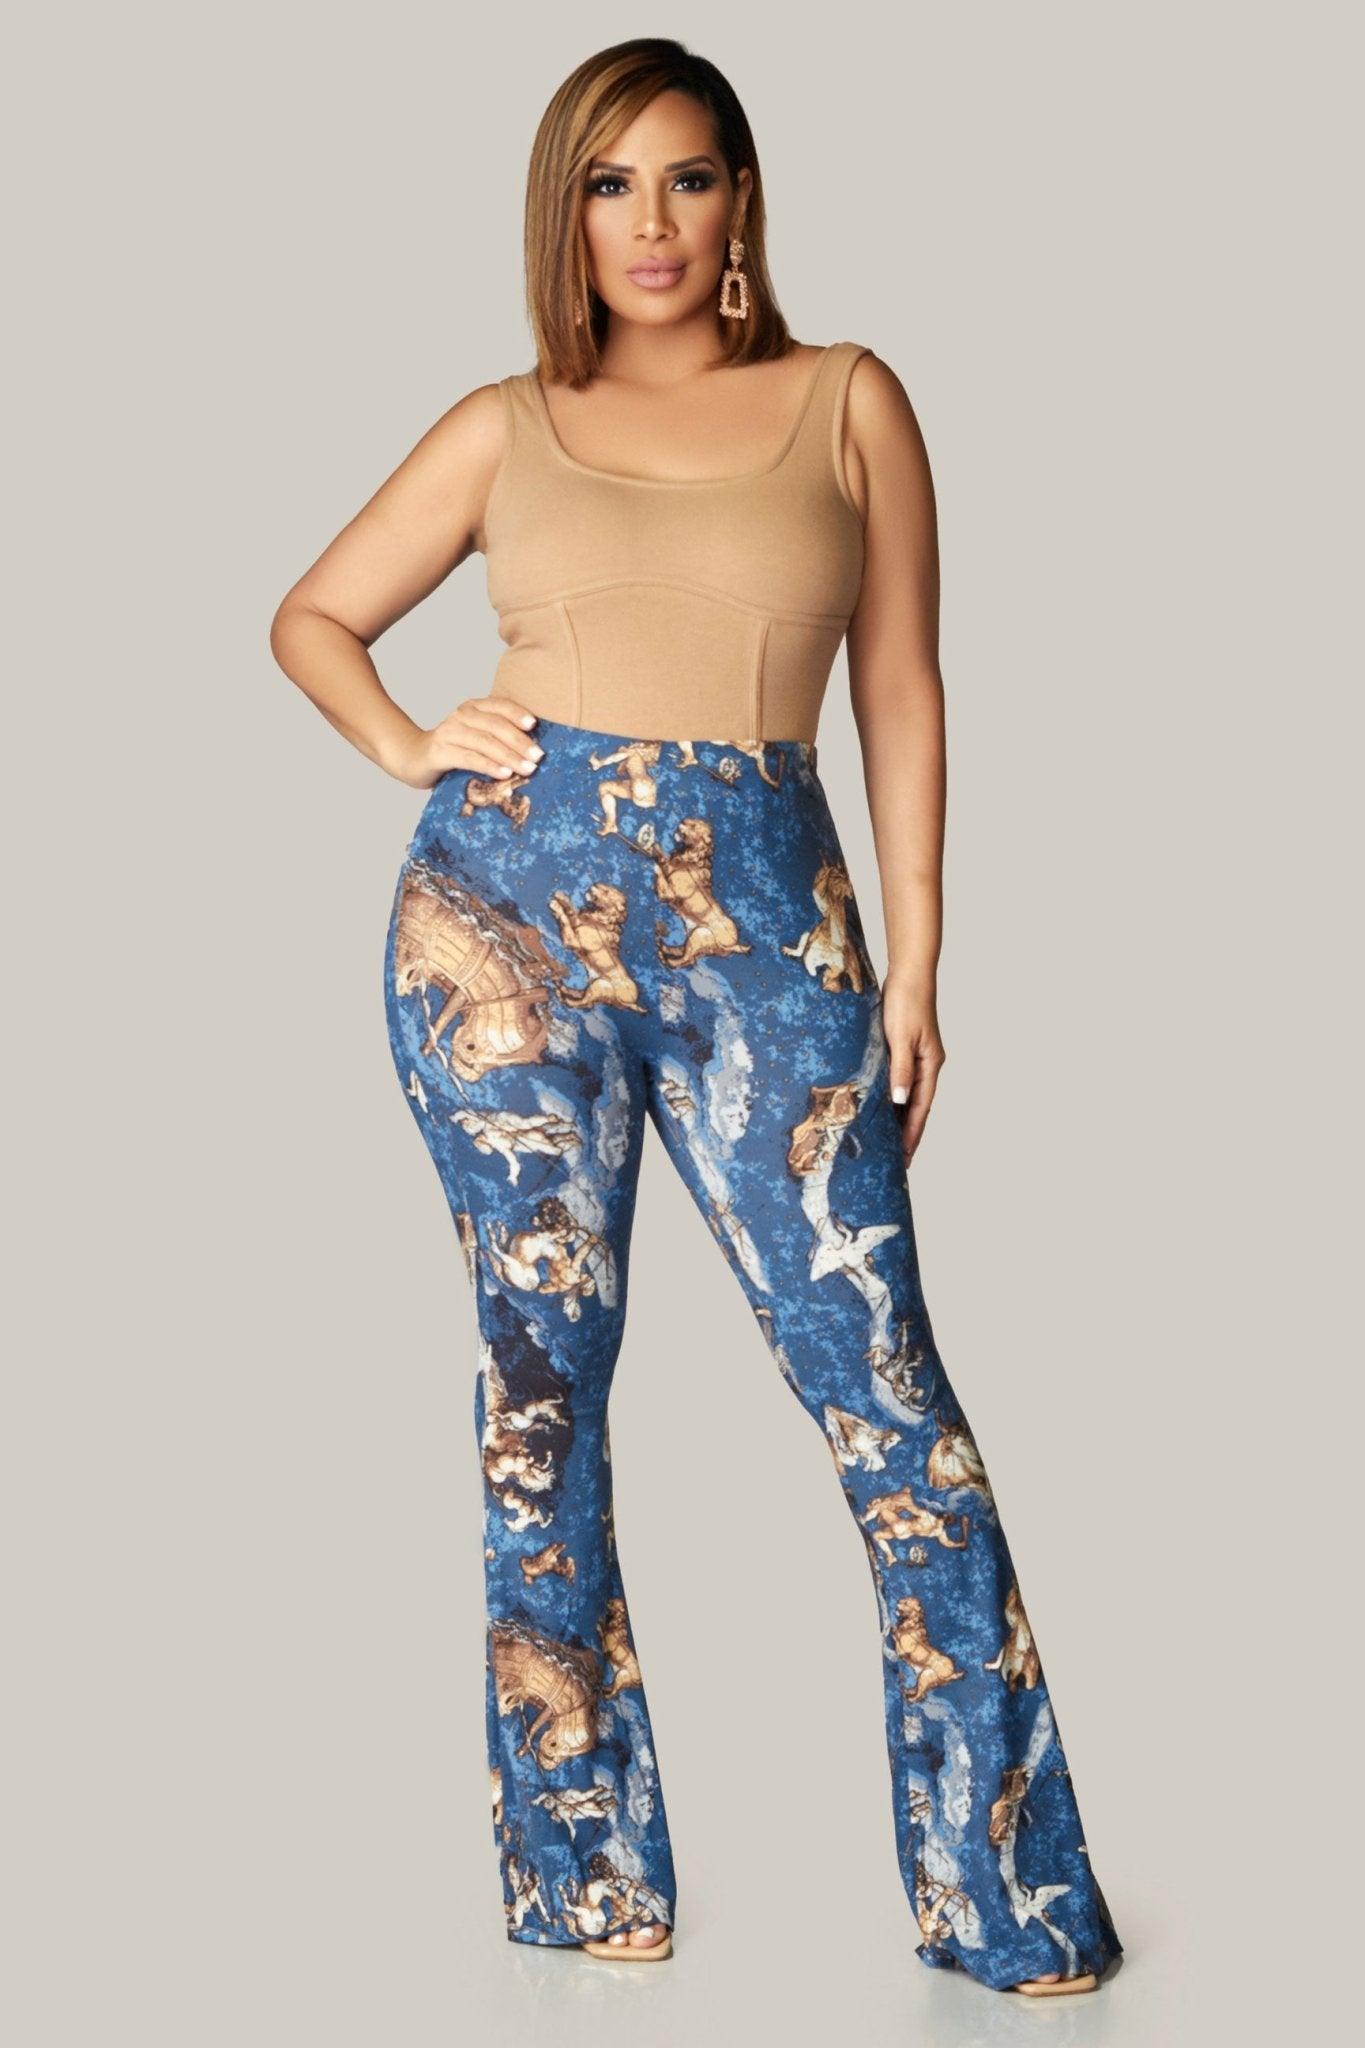 Horoscope Printed Flared Long Pants - MY SEXY STYLES